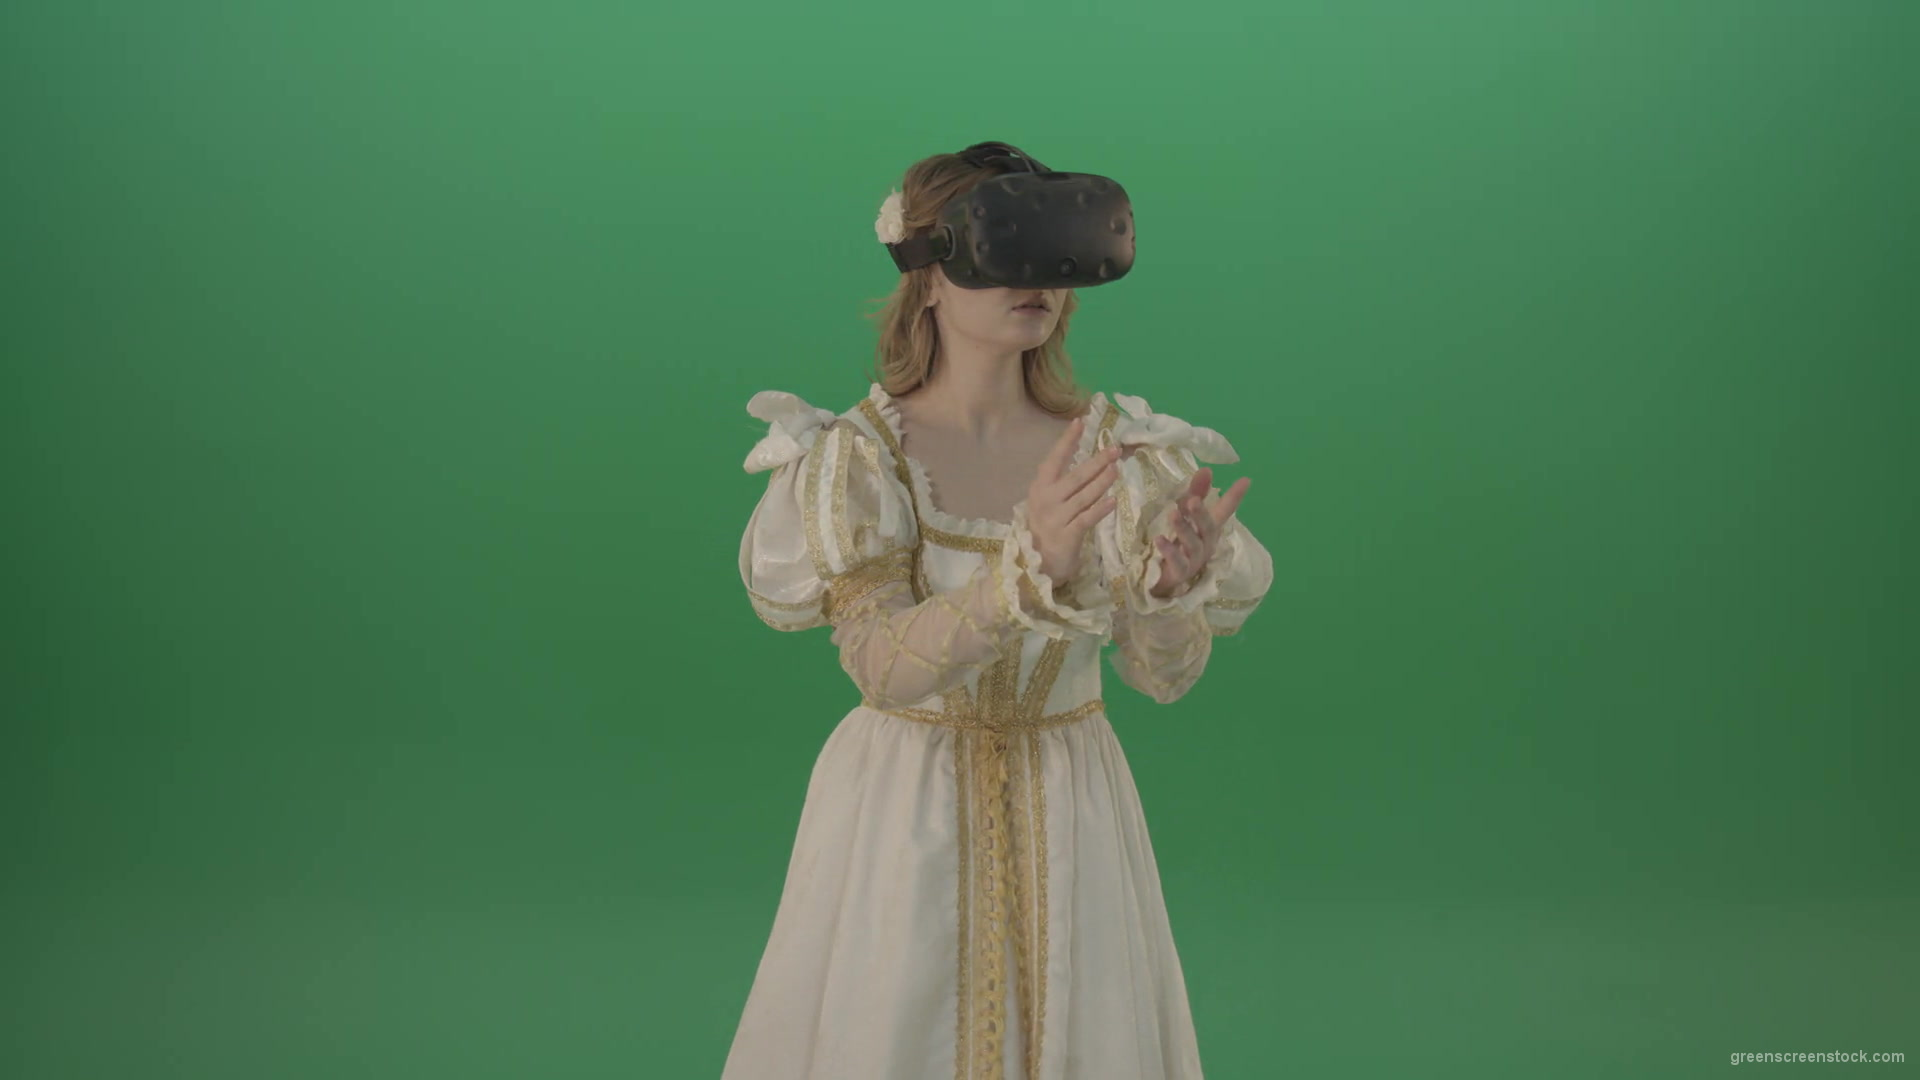 Girl-in-3-in-virtual-reality-has-swallowed-up-in-another-three-dimensional-world-isolated-on-green-screen-1920_009 Green Screen Stock